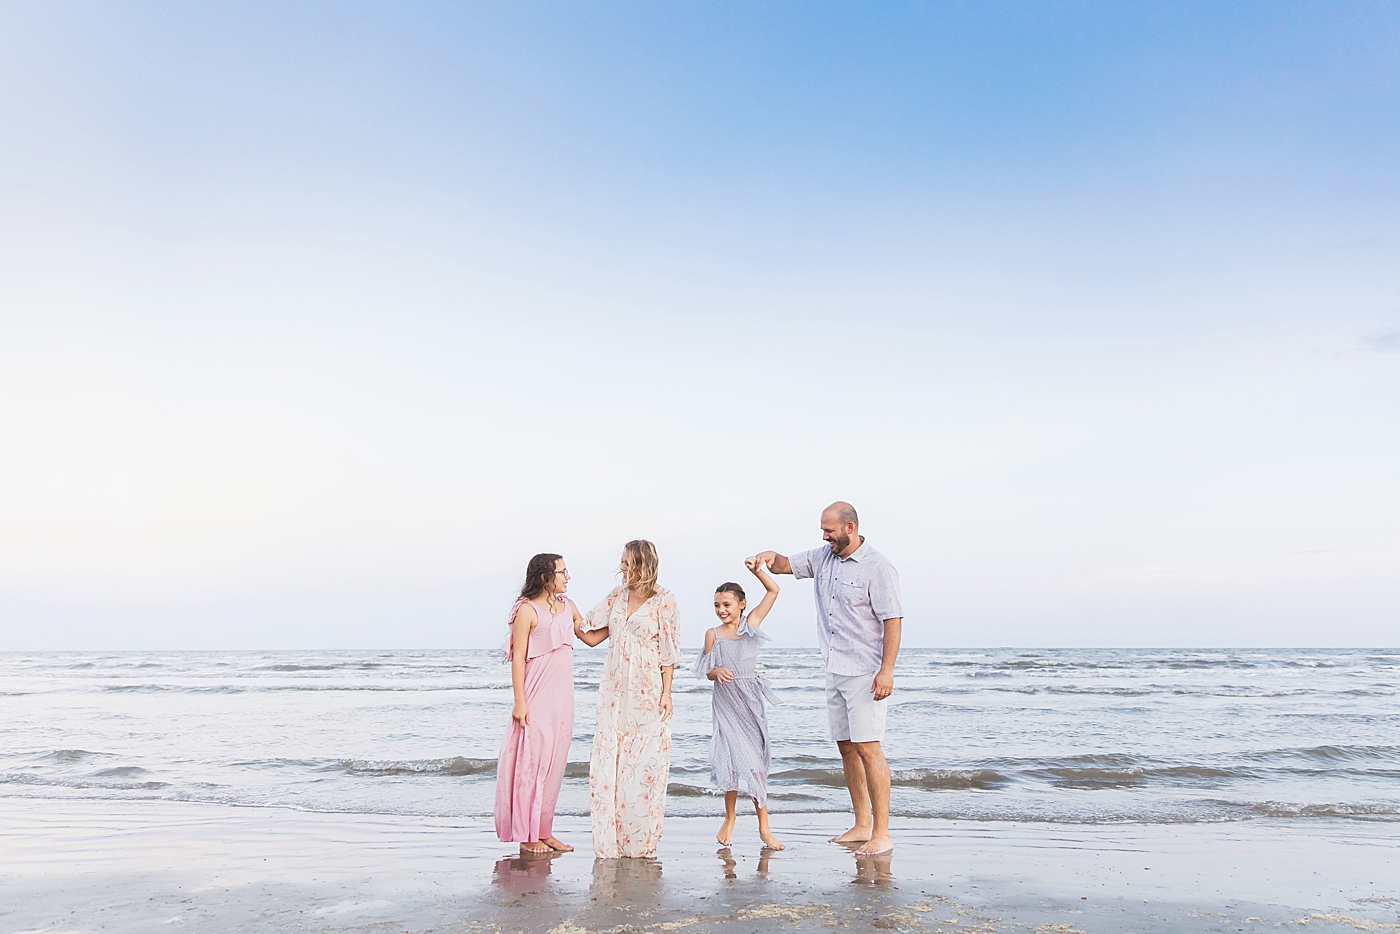 Family dancing on the beach. Photo by Fresh Light Photography.